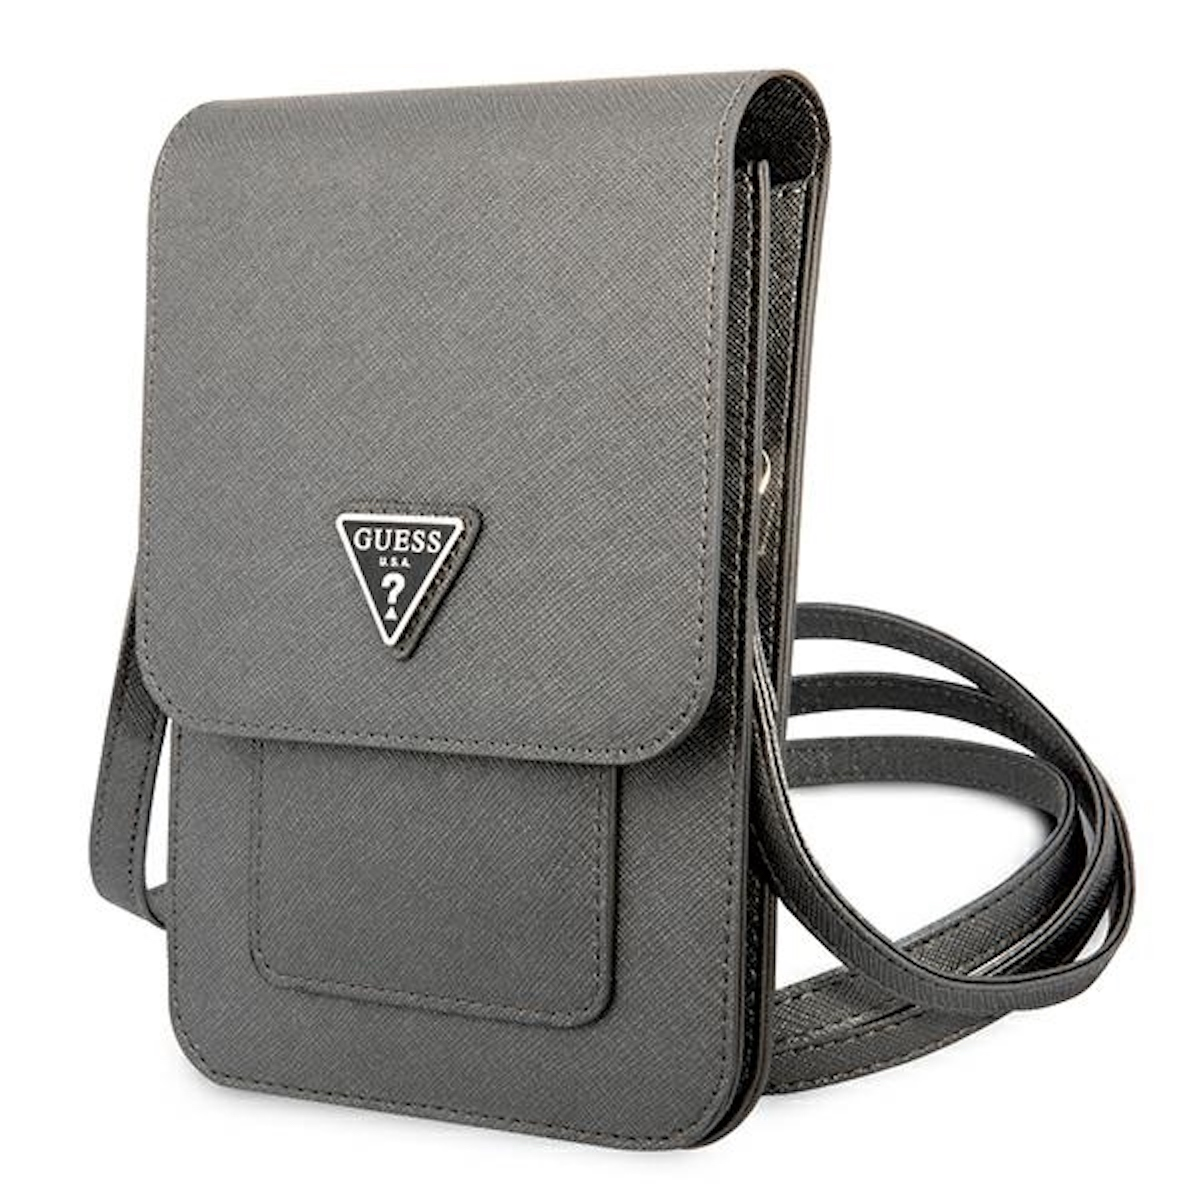 GUESS Saffiano Triangle Grau Cover, Tasche, Universelle Umhängetasche, Full Universell